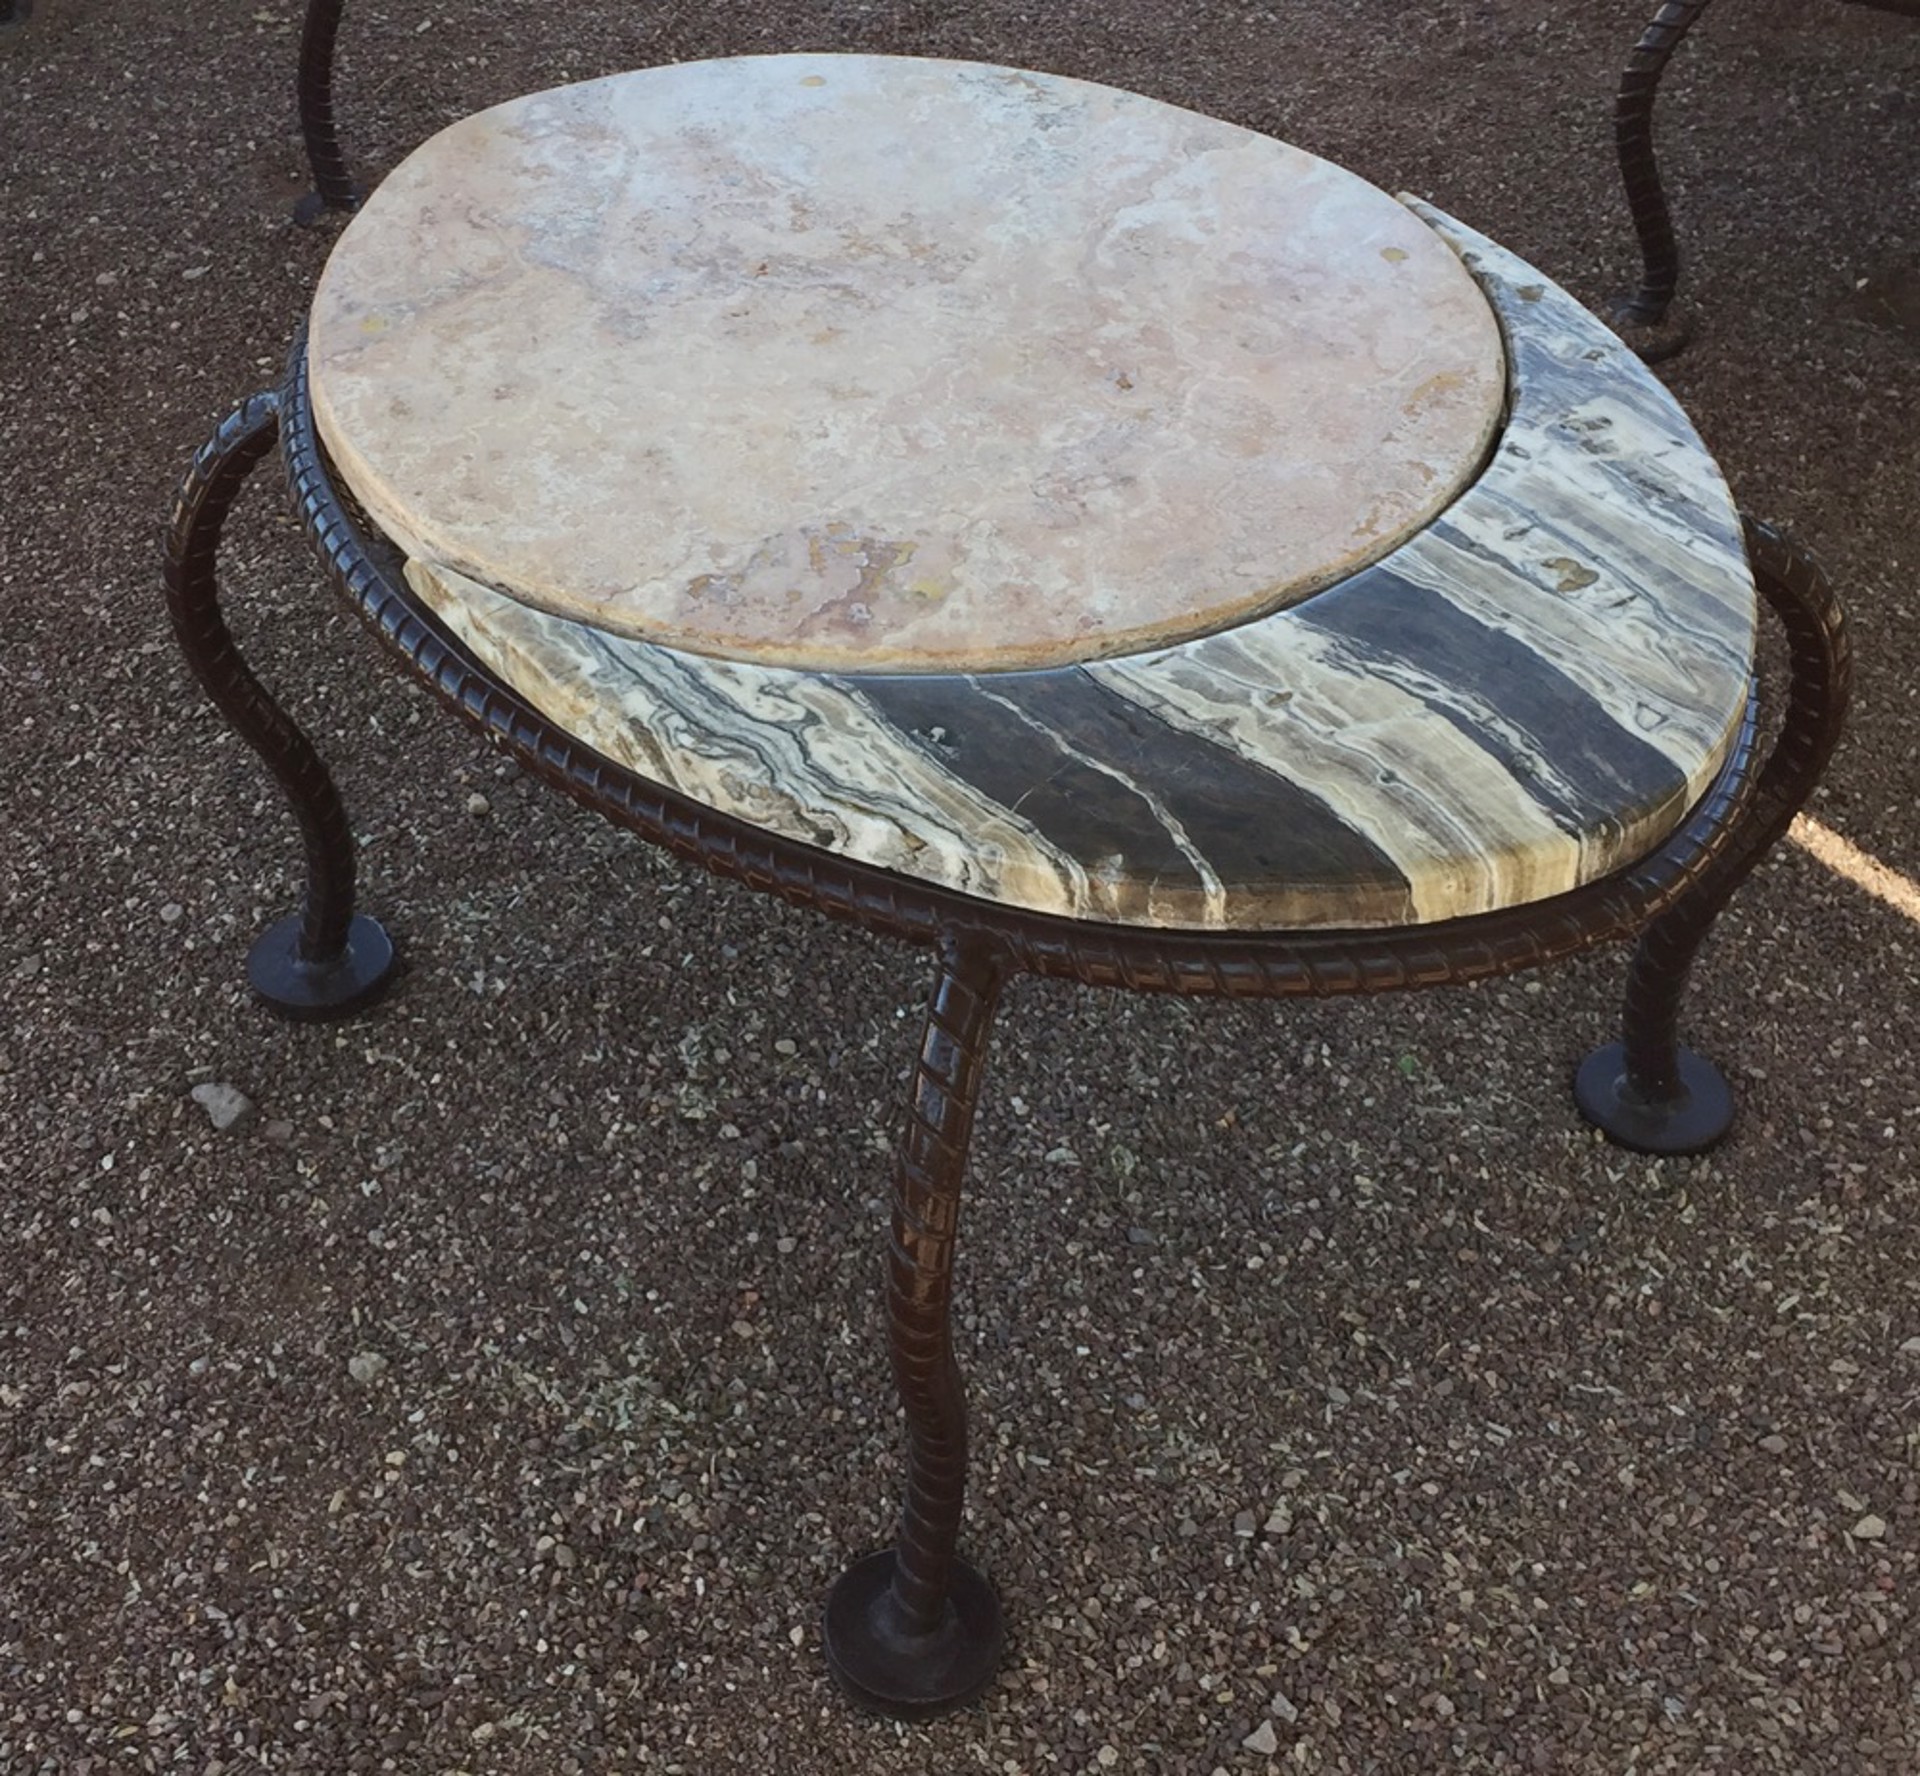 Rock Furniture - Eclipse Coffee Table - Arizona Onyx - New Mexico Travertine by Gerald Dumont